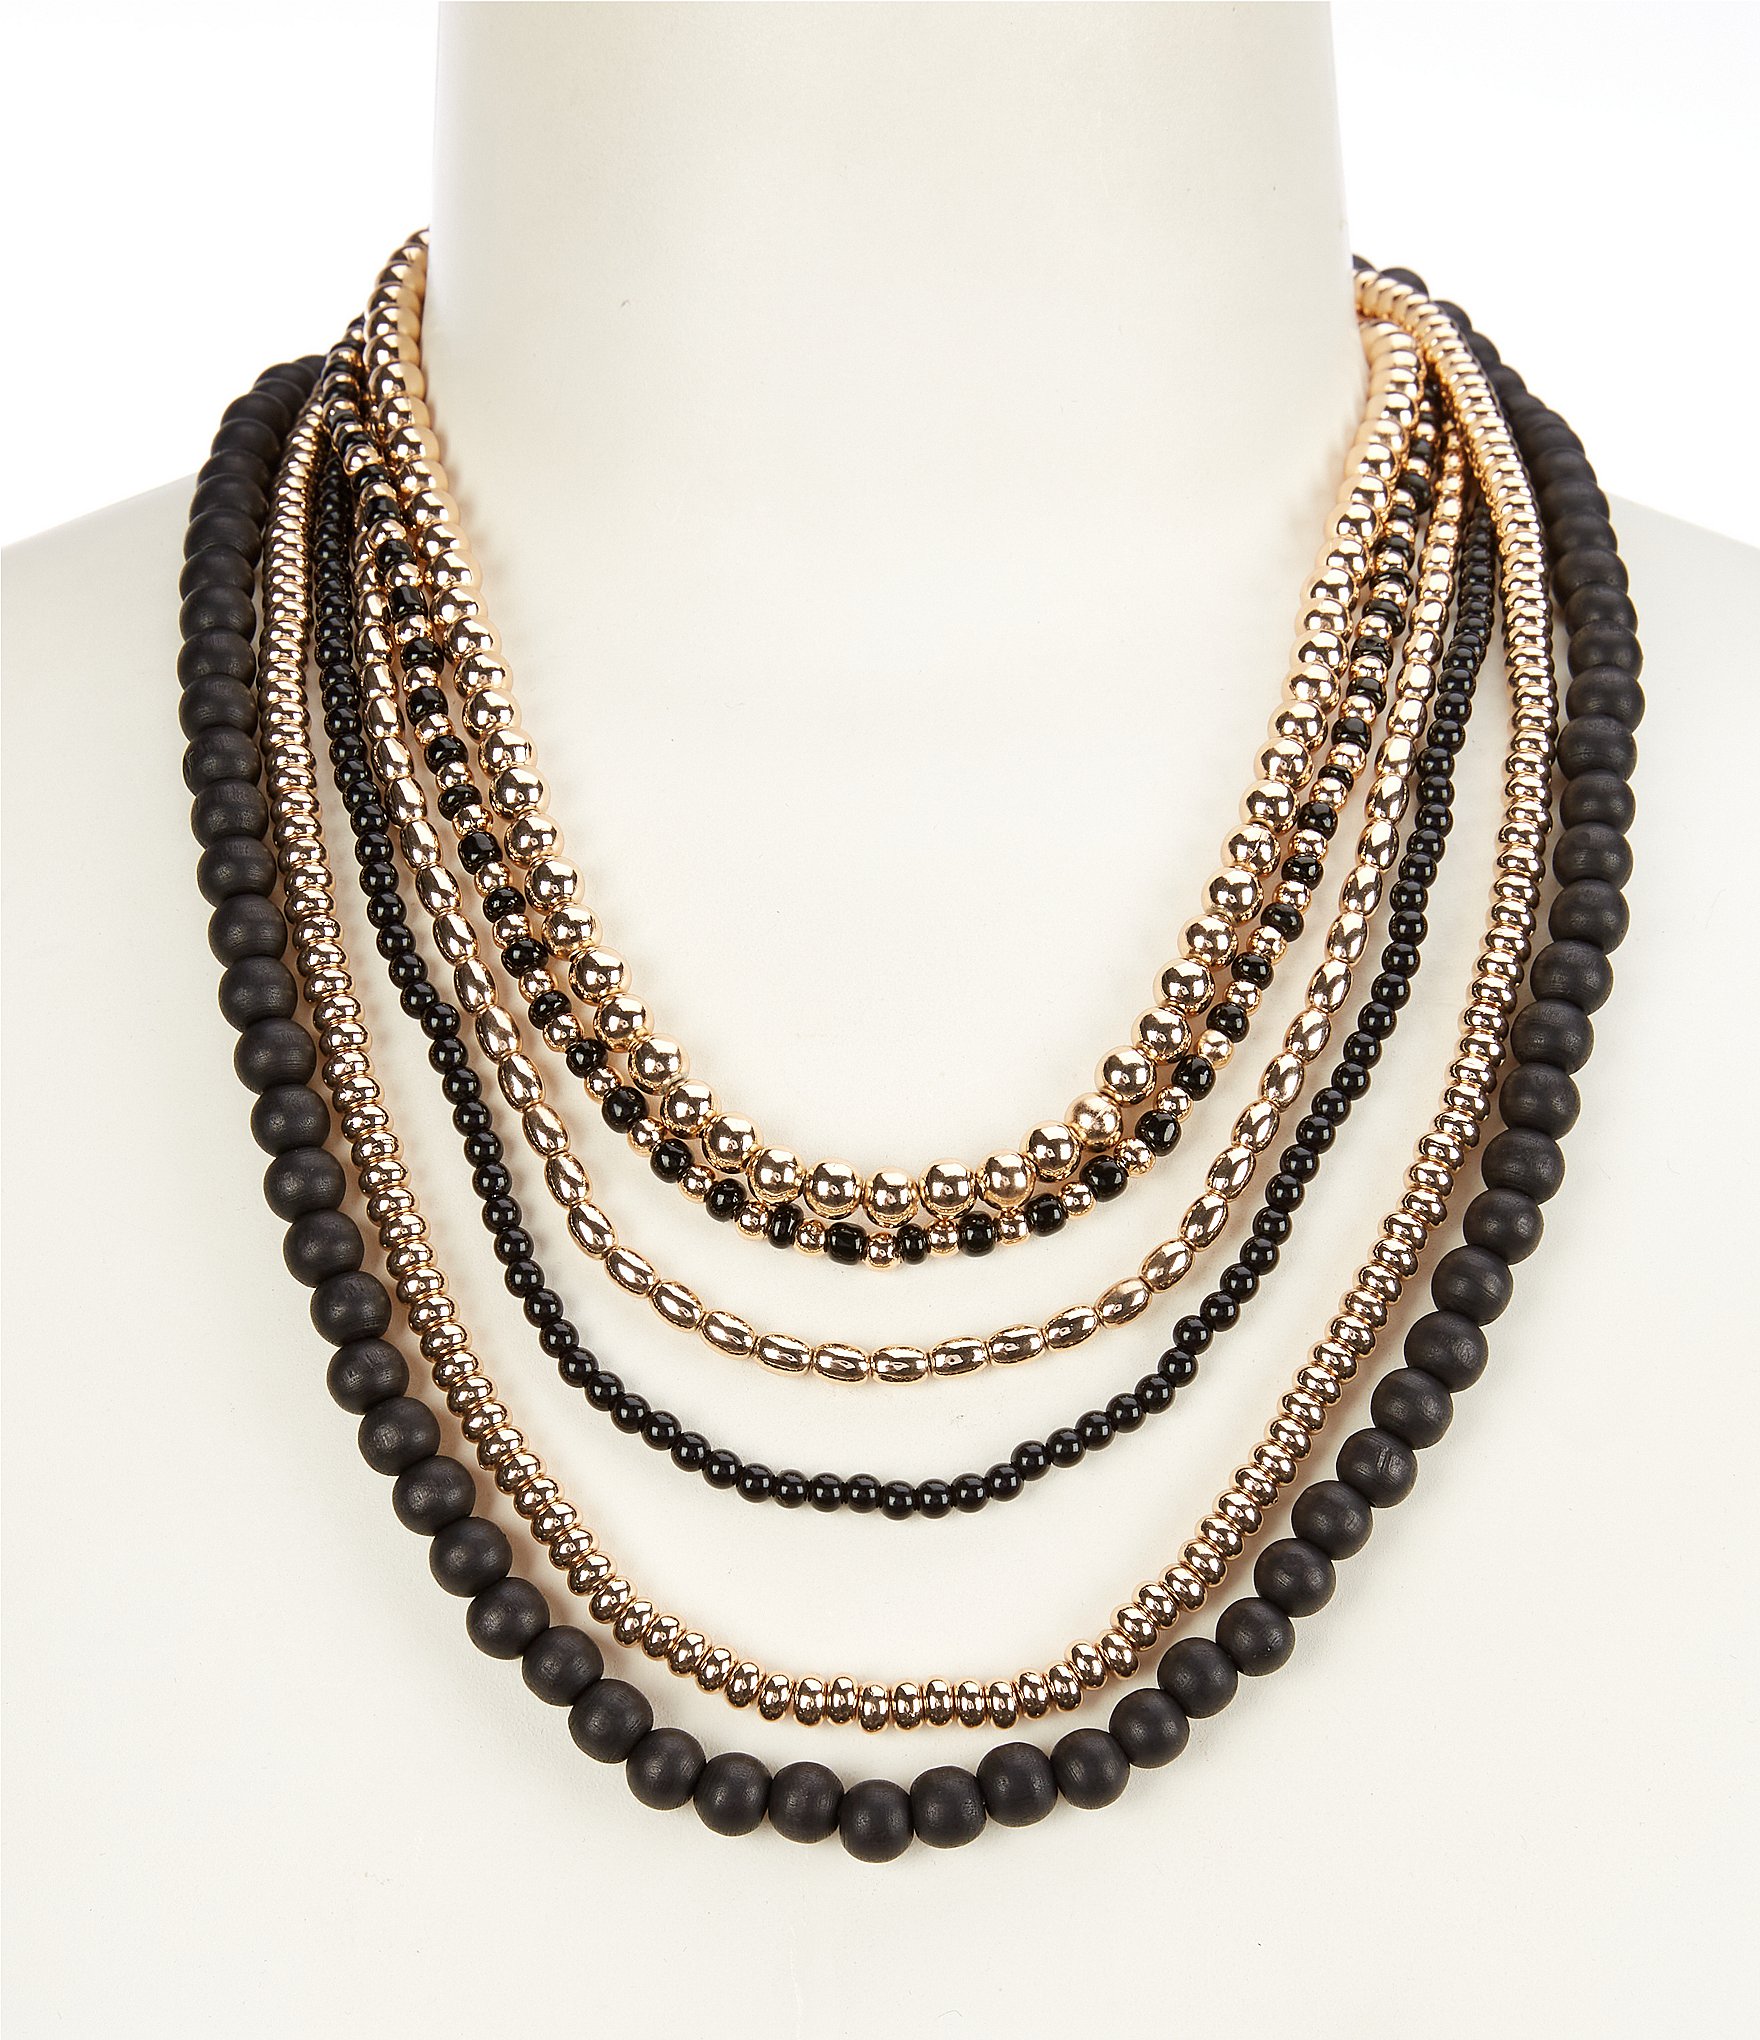 Anna & Ava Black and Gold Beaded Multi Layer Statement Necklace | Dillard's